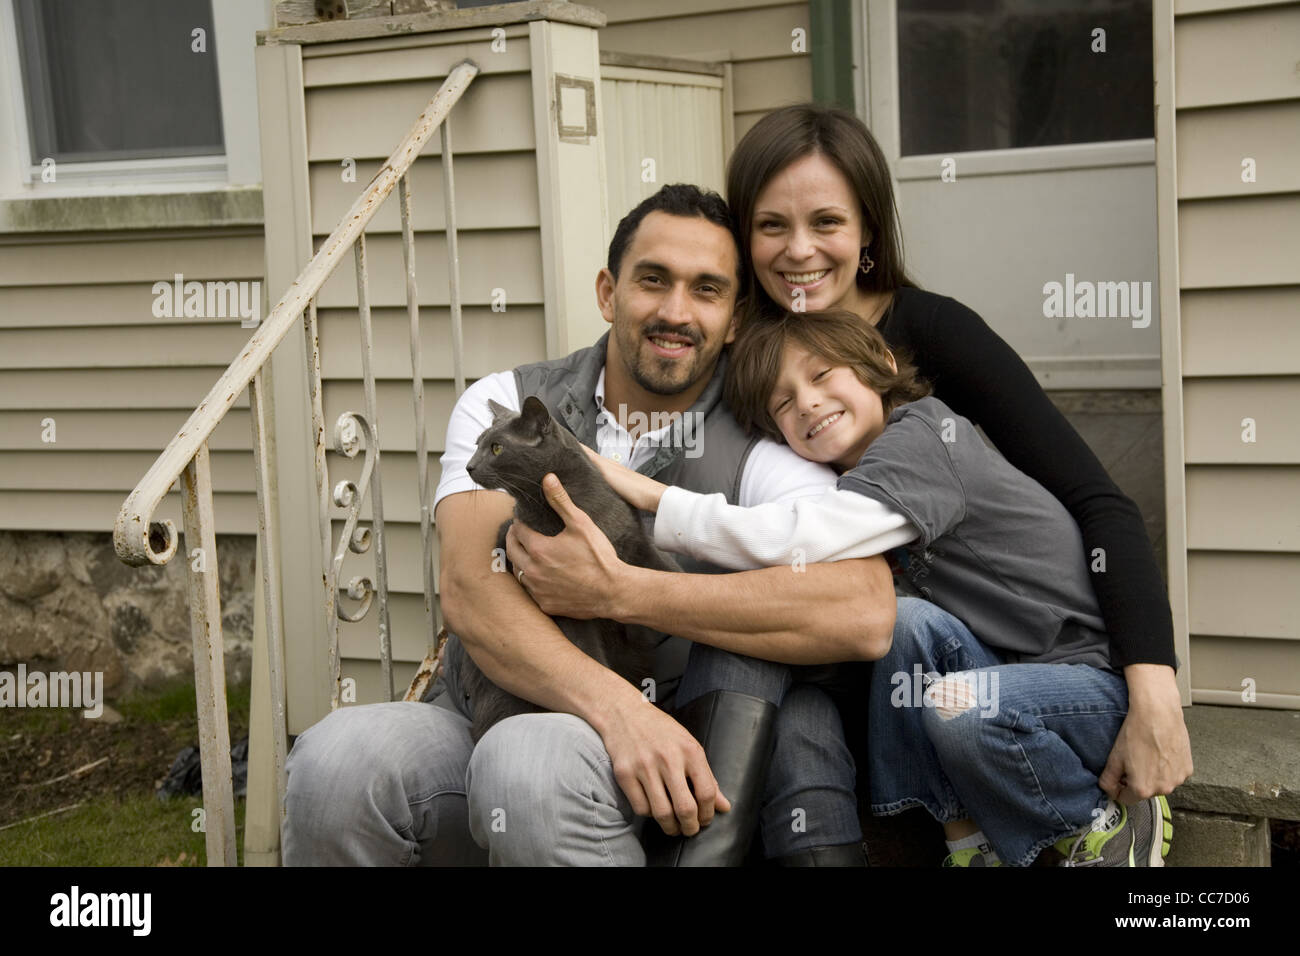 Portrait of an American family with dad from Guatemala and mom from Poland. Stock Photo